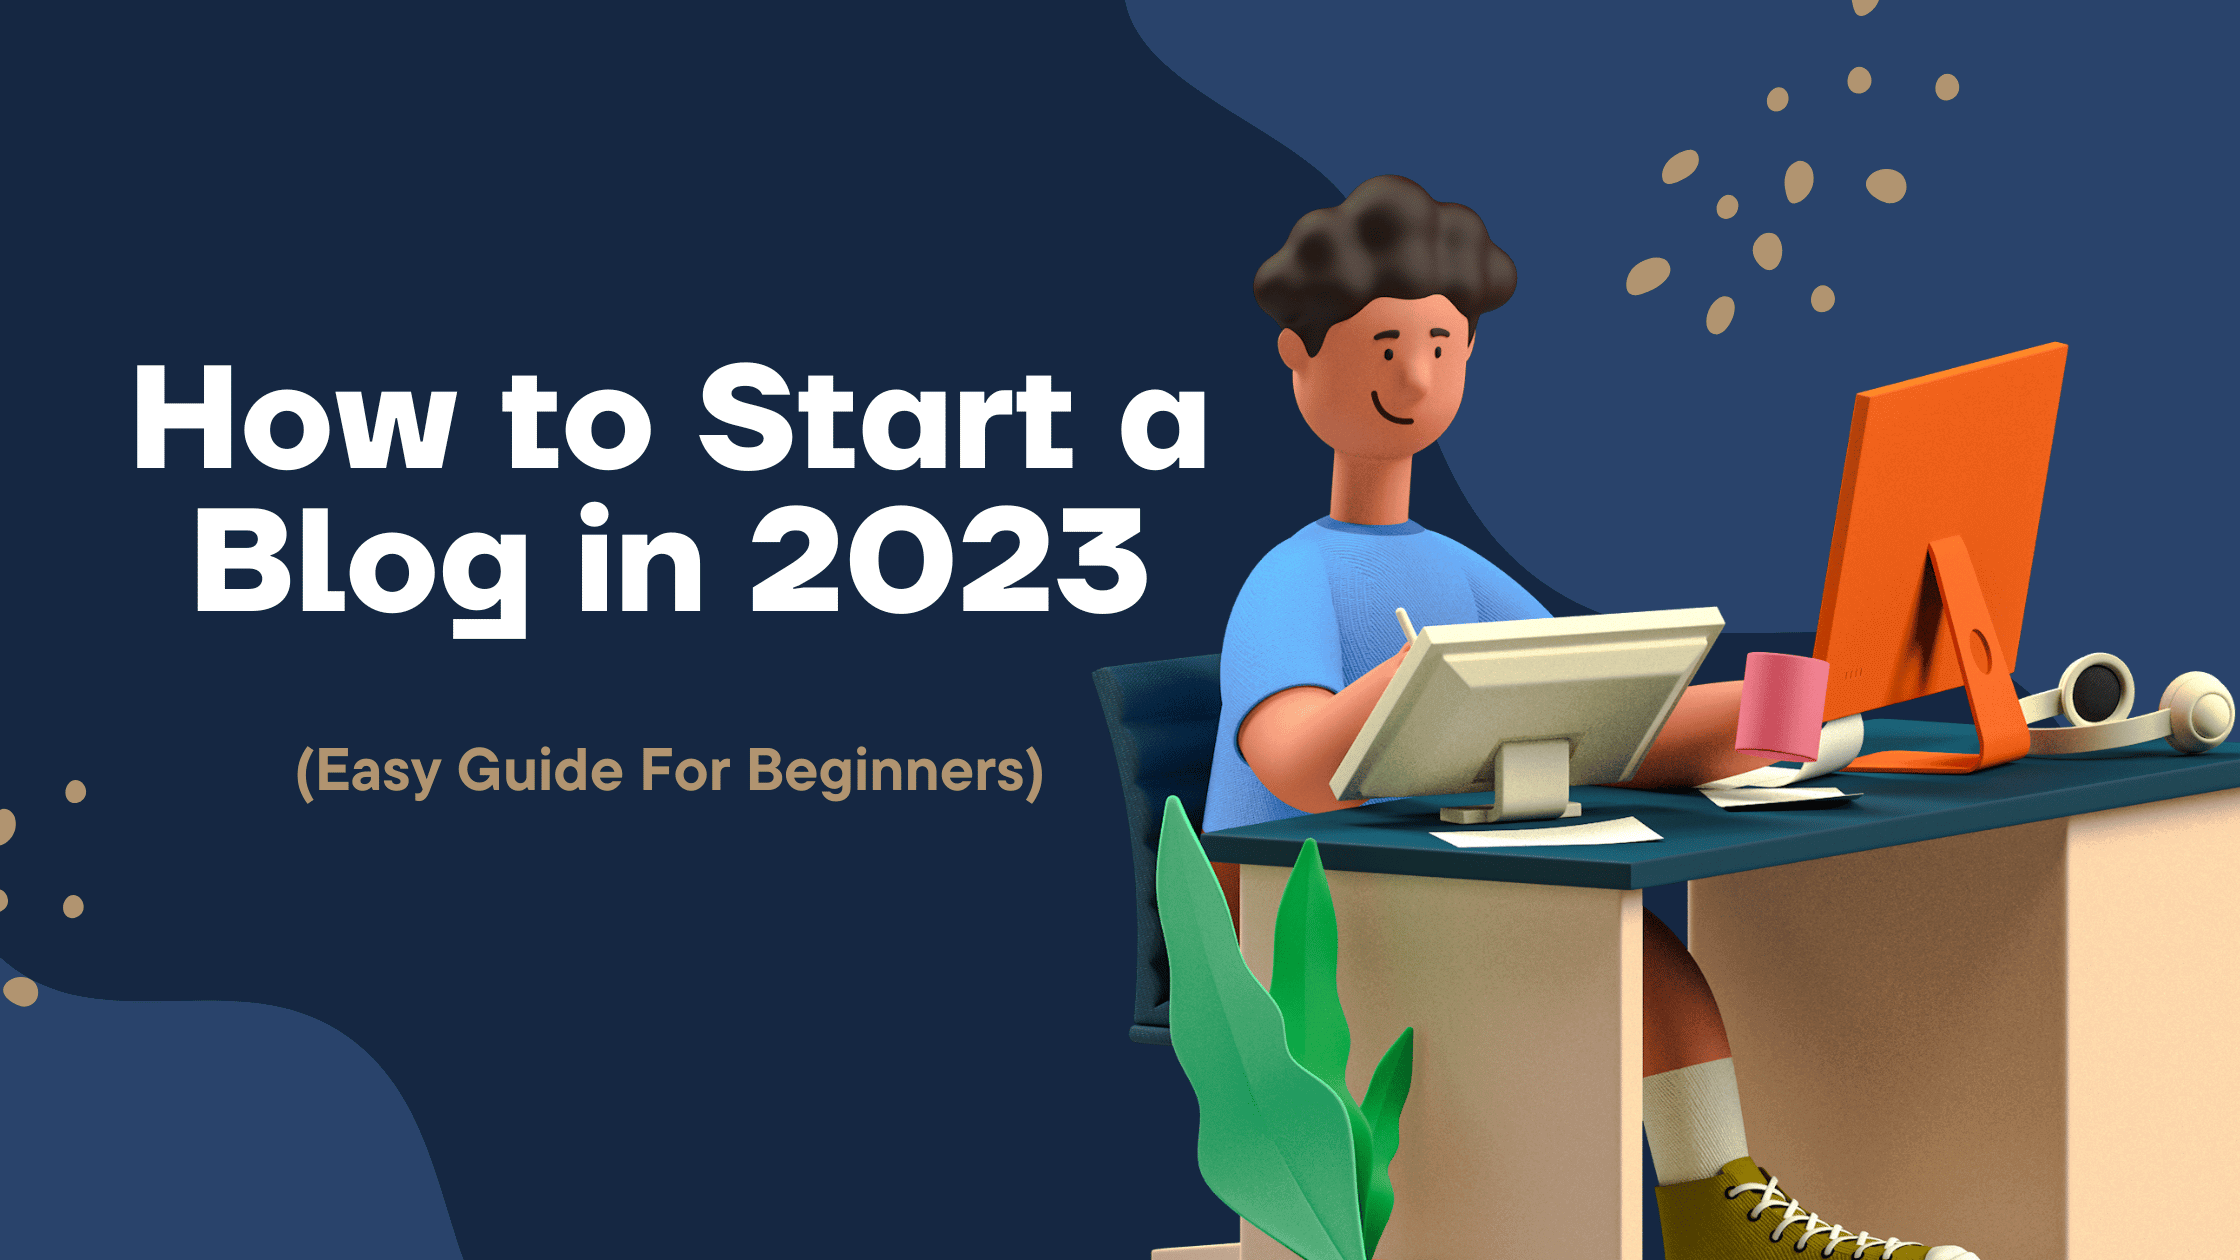 How to Start a Blog in 2023